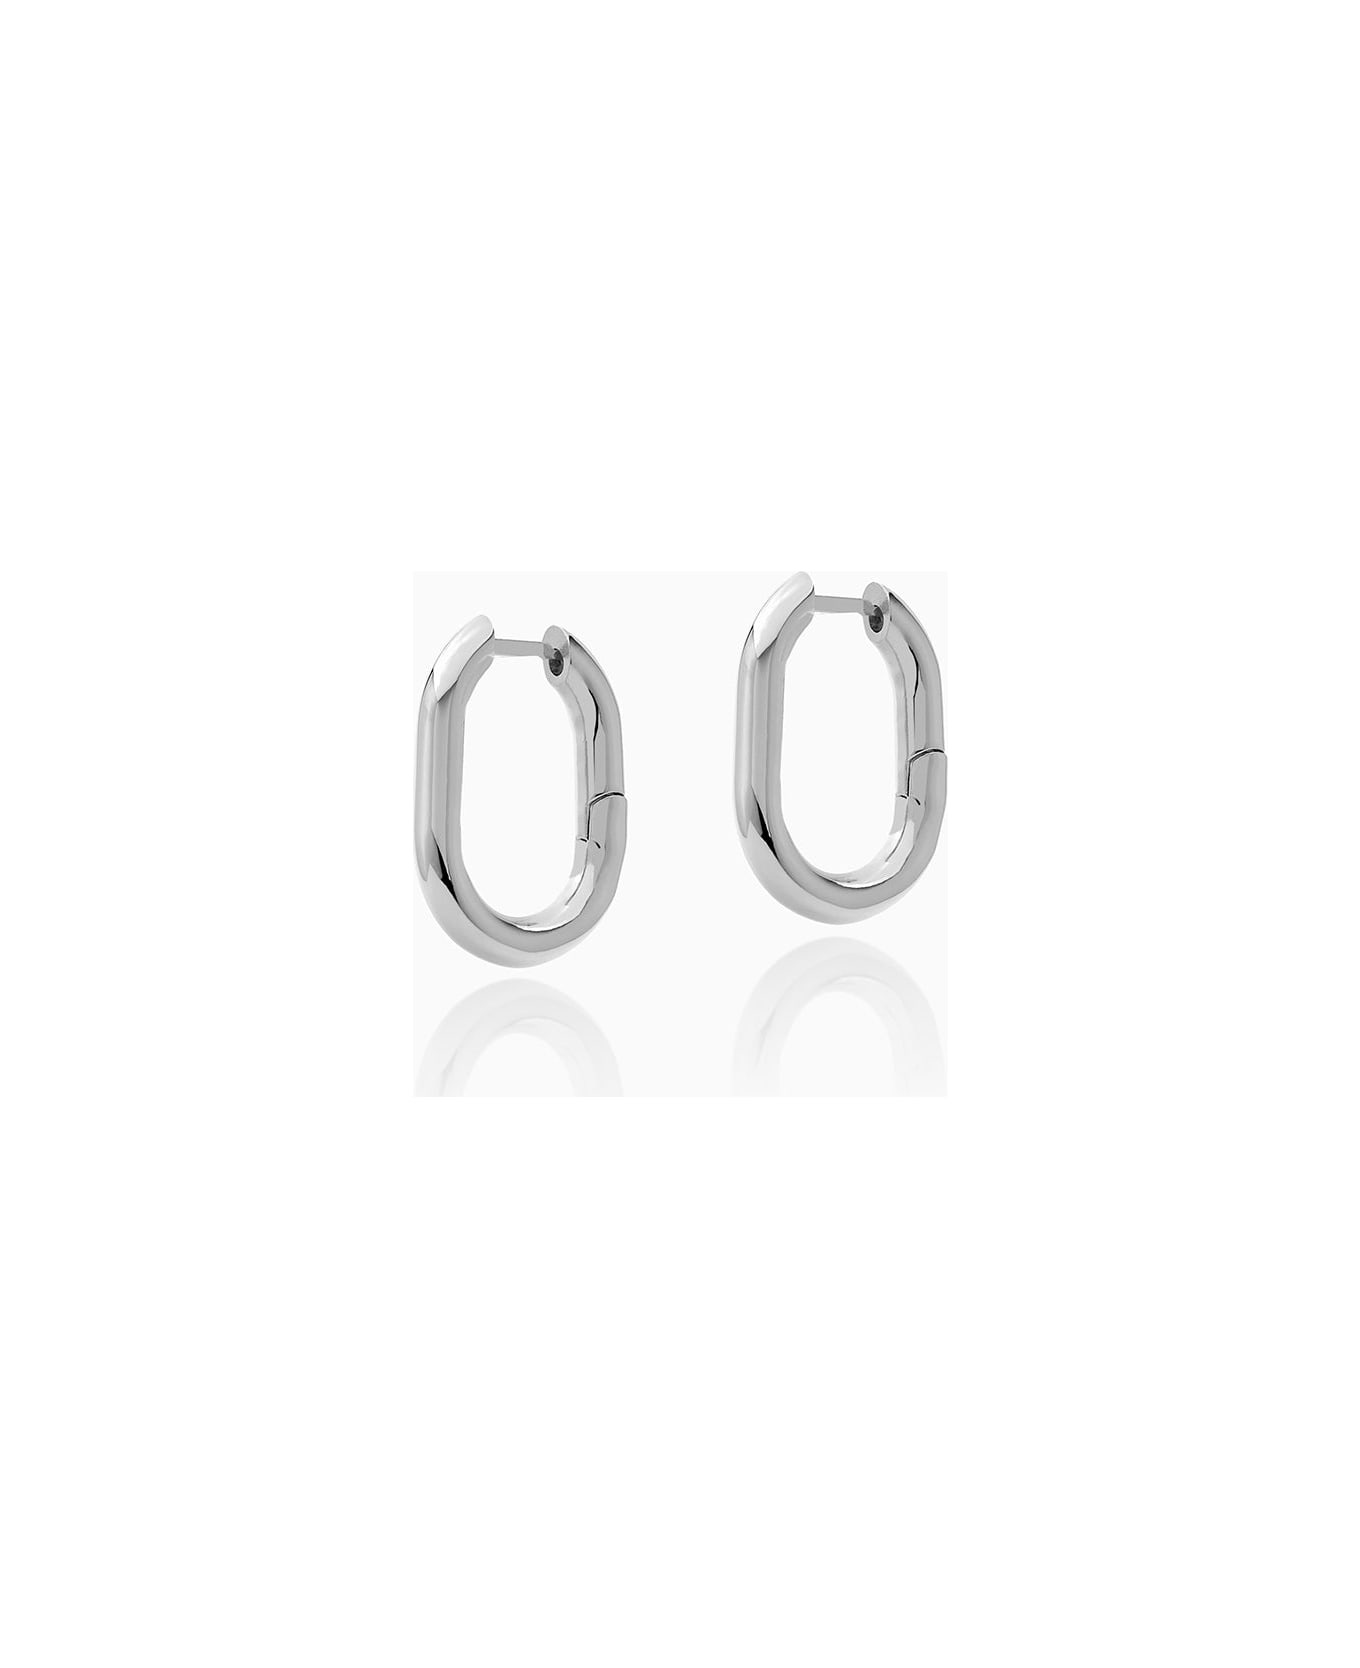 Federica Tosi Earring Christy Silver - SILVER